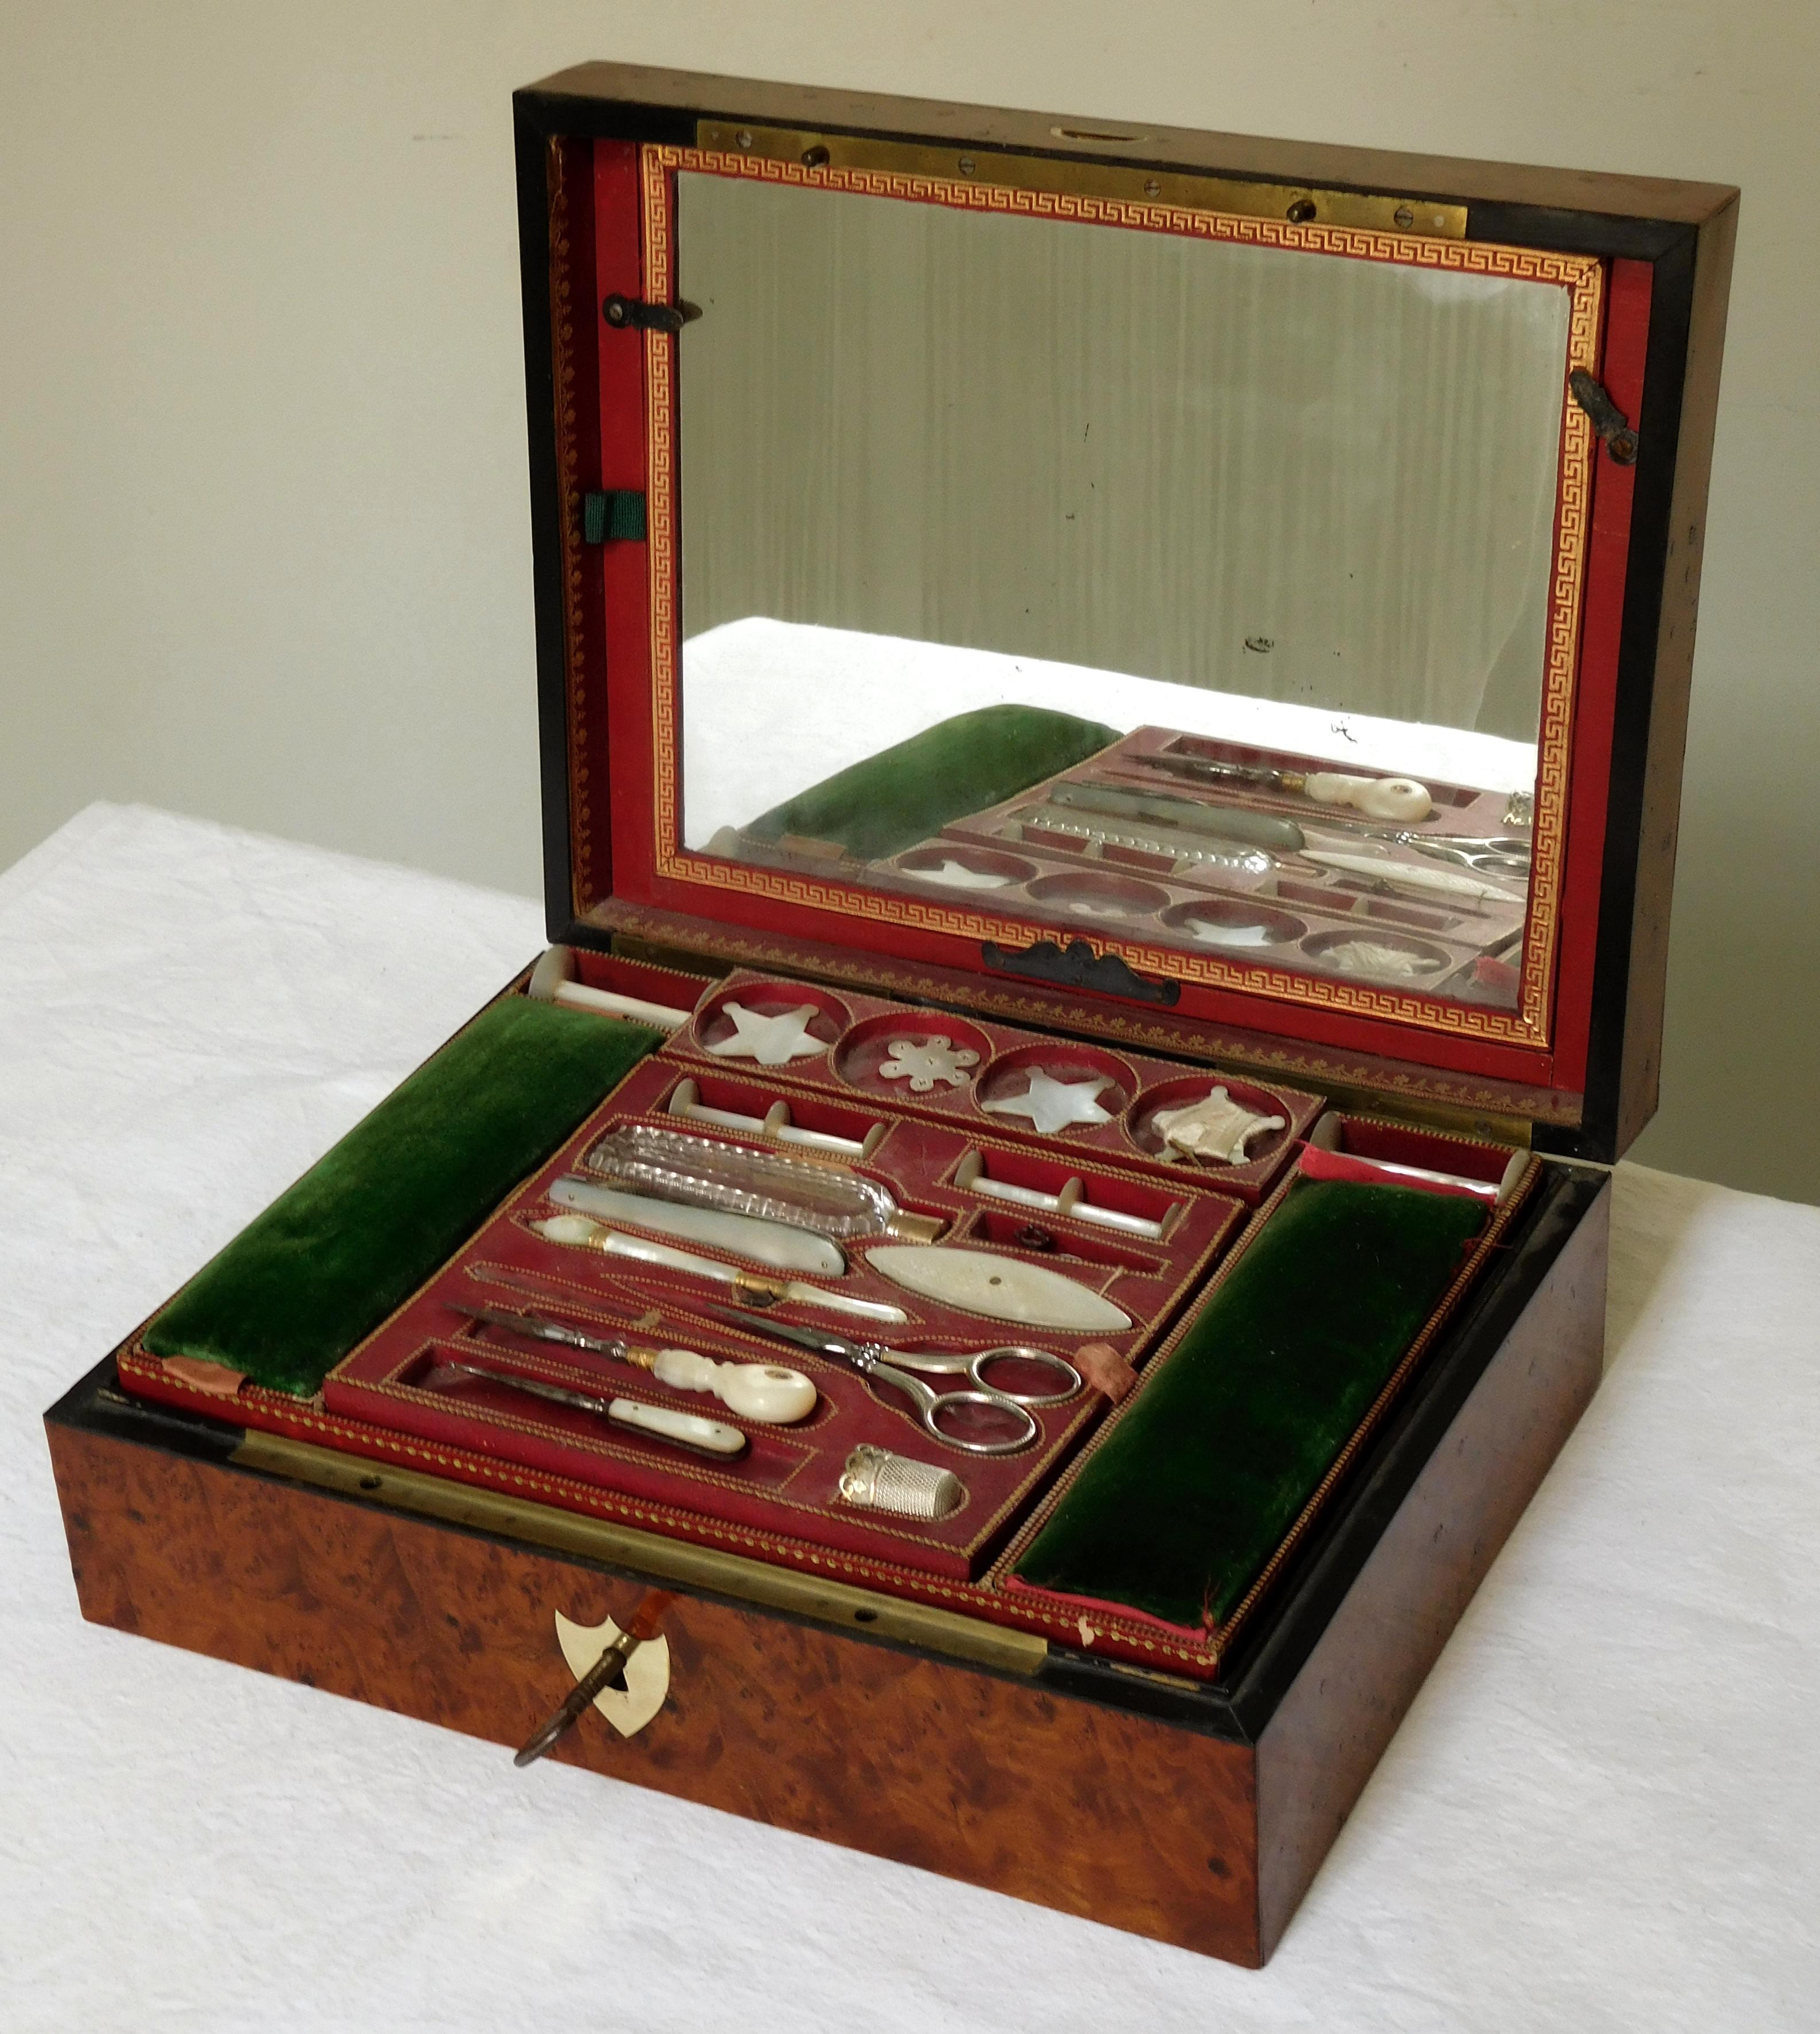 Luxurious travel set for a lady, French early 19th century production - Empire period circa 1815. This travel set is mainly composed of sewing accessories, most of them made of mother of pearl (scissors and thimble are made of sterling silver